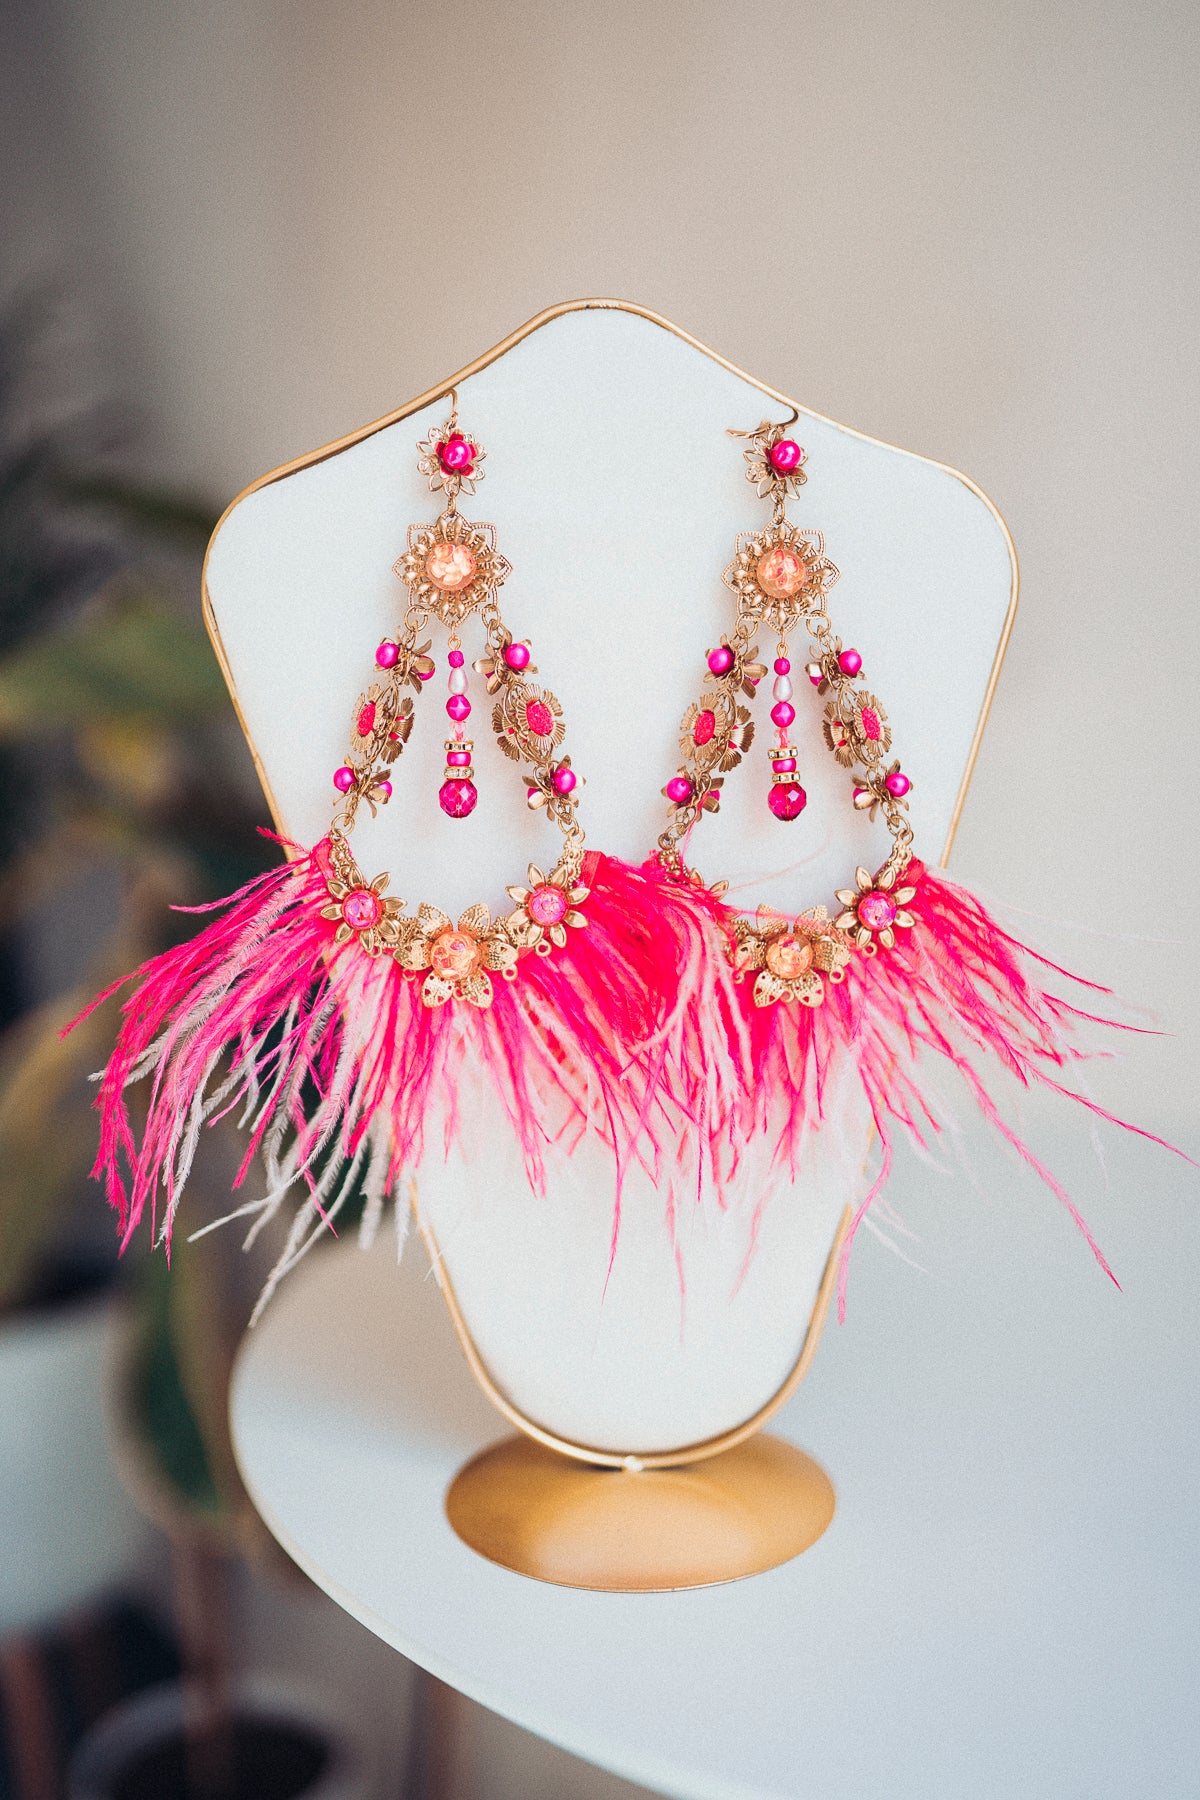 Pink and White Feather Earrings | Glamorous Gamer Girls